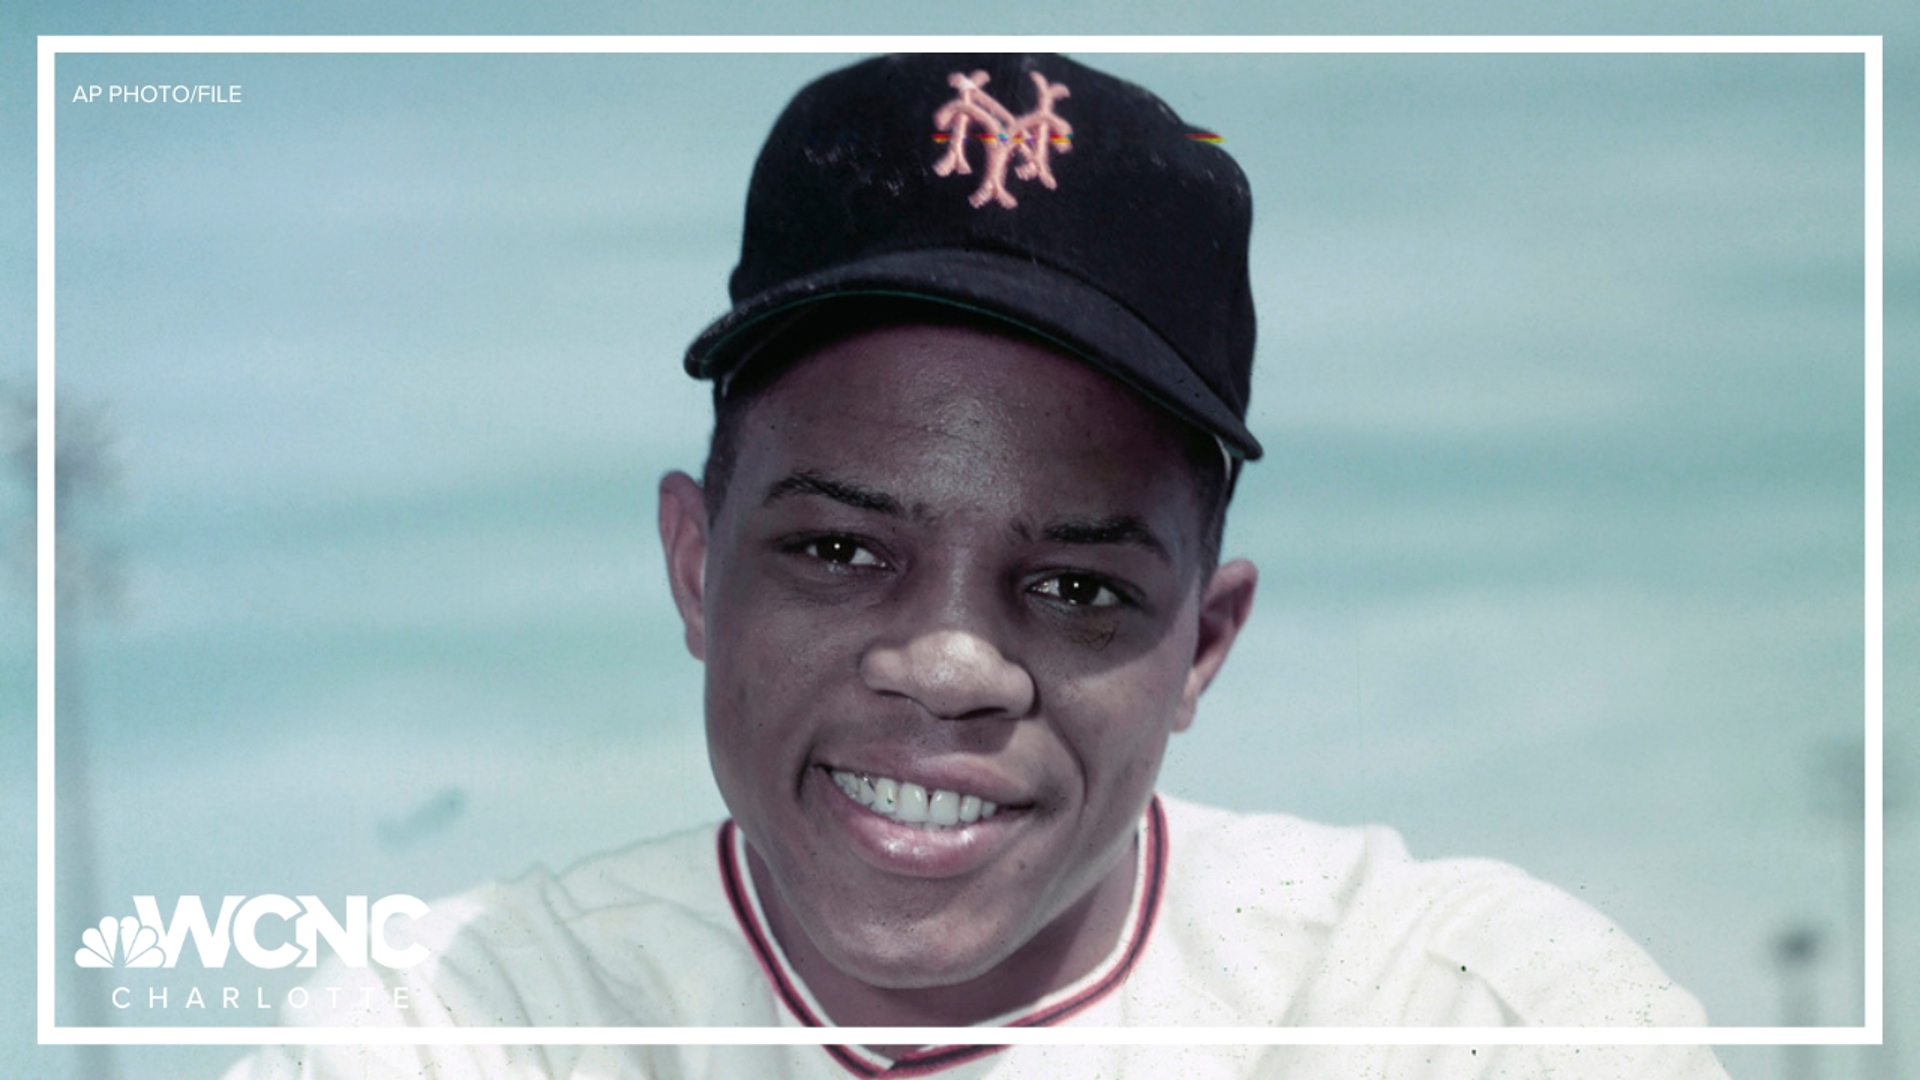 WCNC’s Nick Sturdivant shows the local impact of Willie Mays.